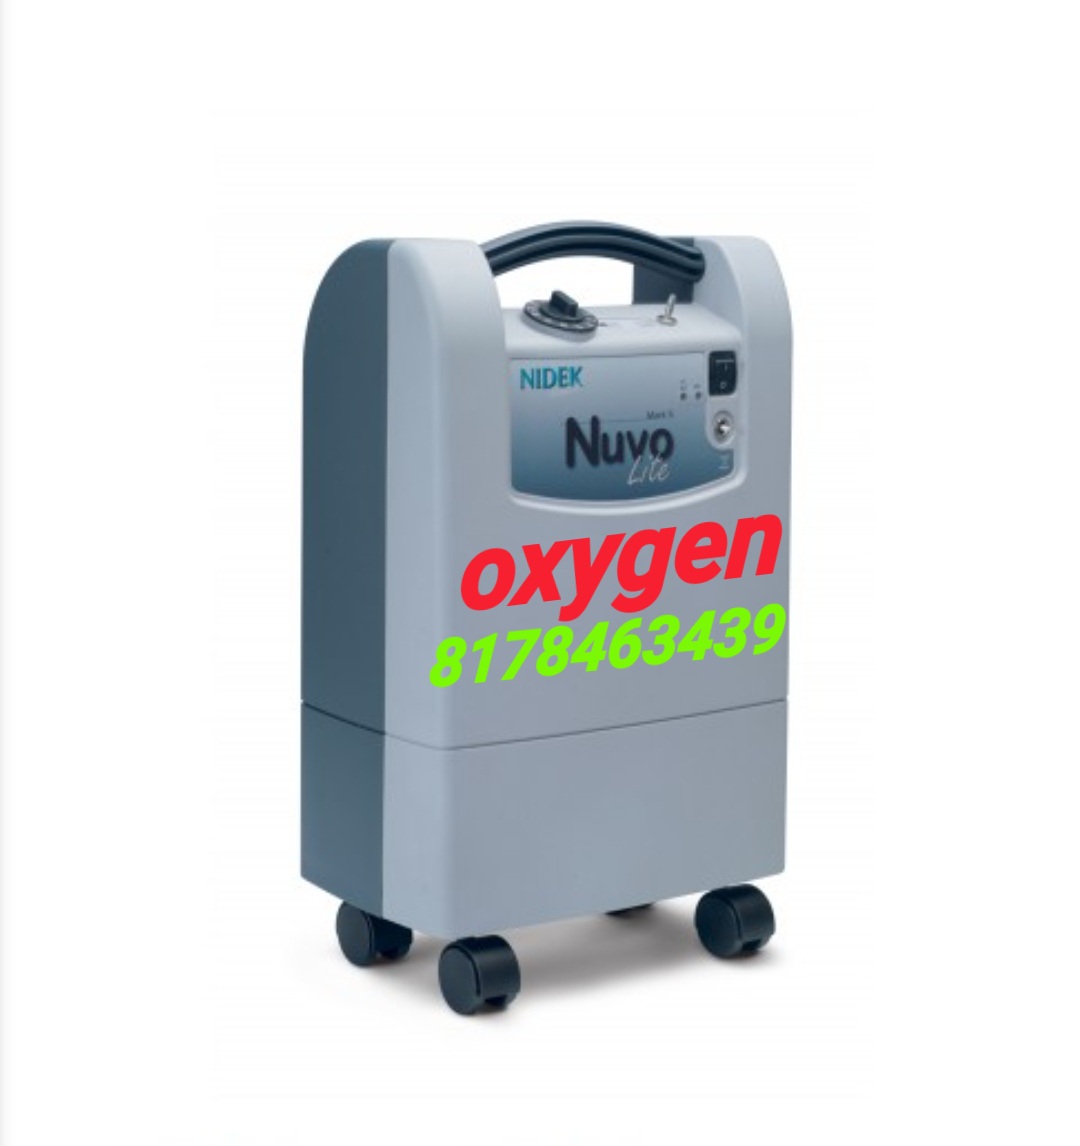 8178463439 Oxygen Machine On Rent In new friends colony